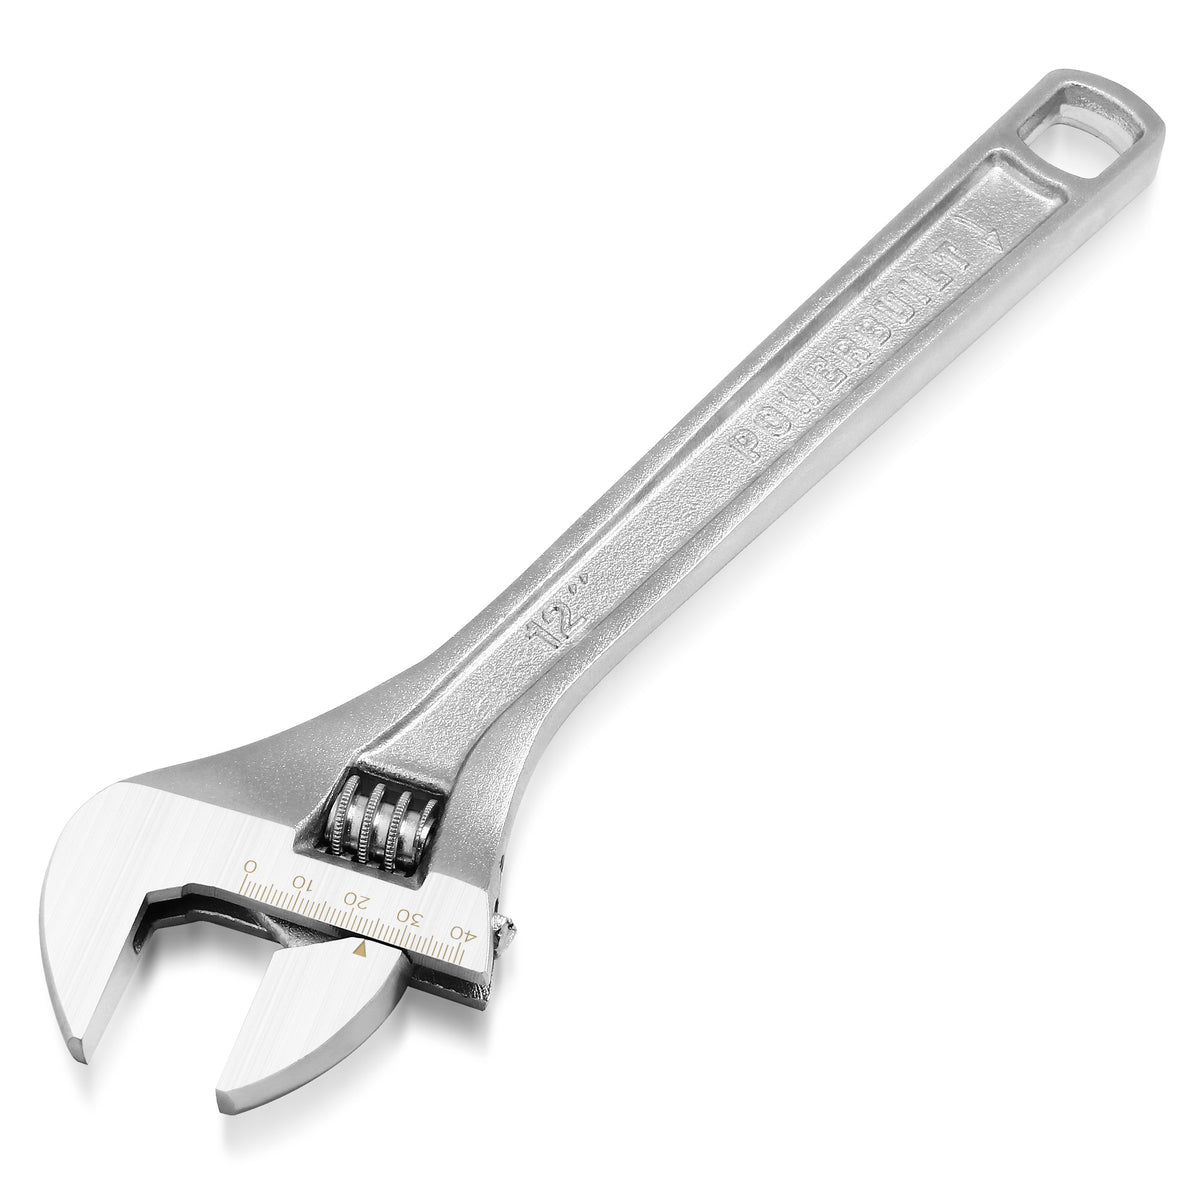 12 in. Adjustable Wrench